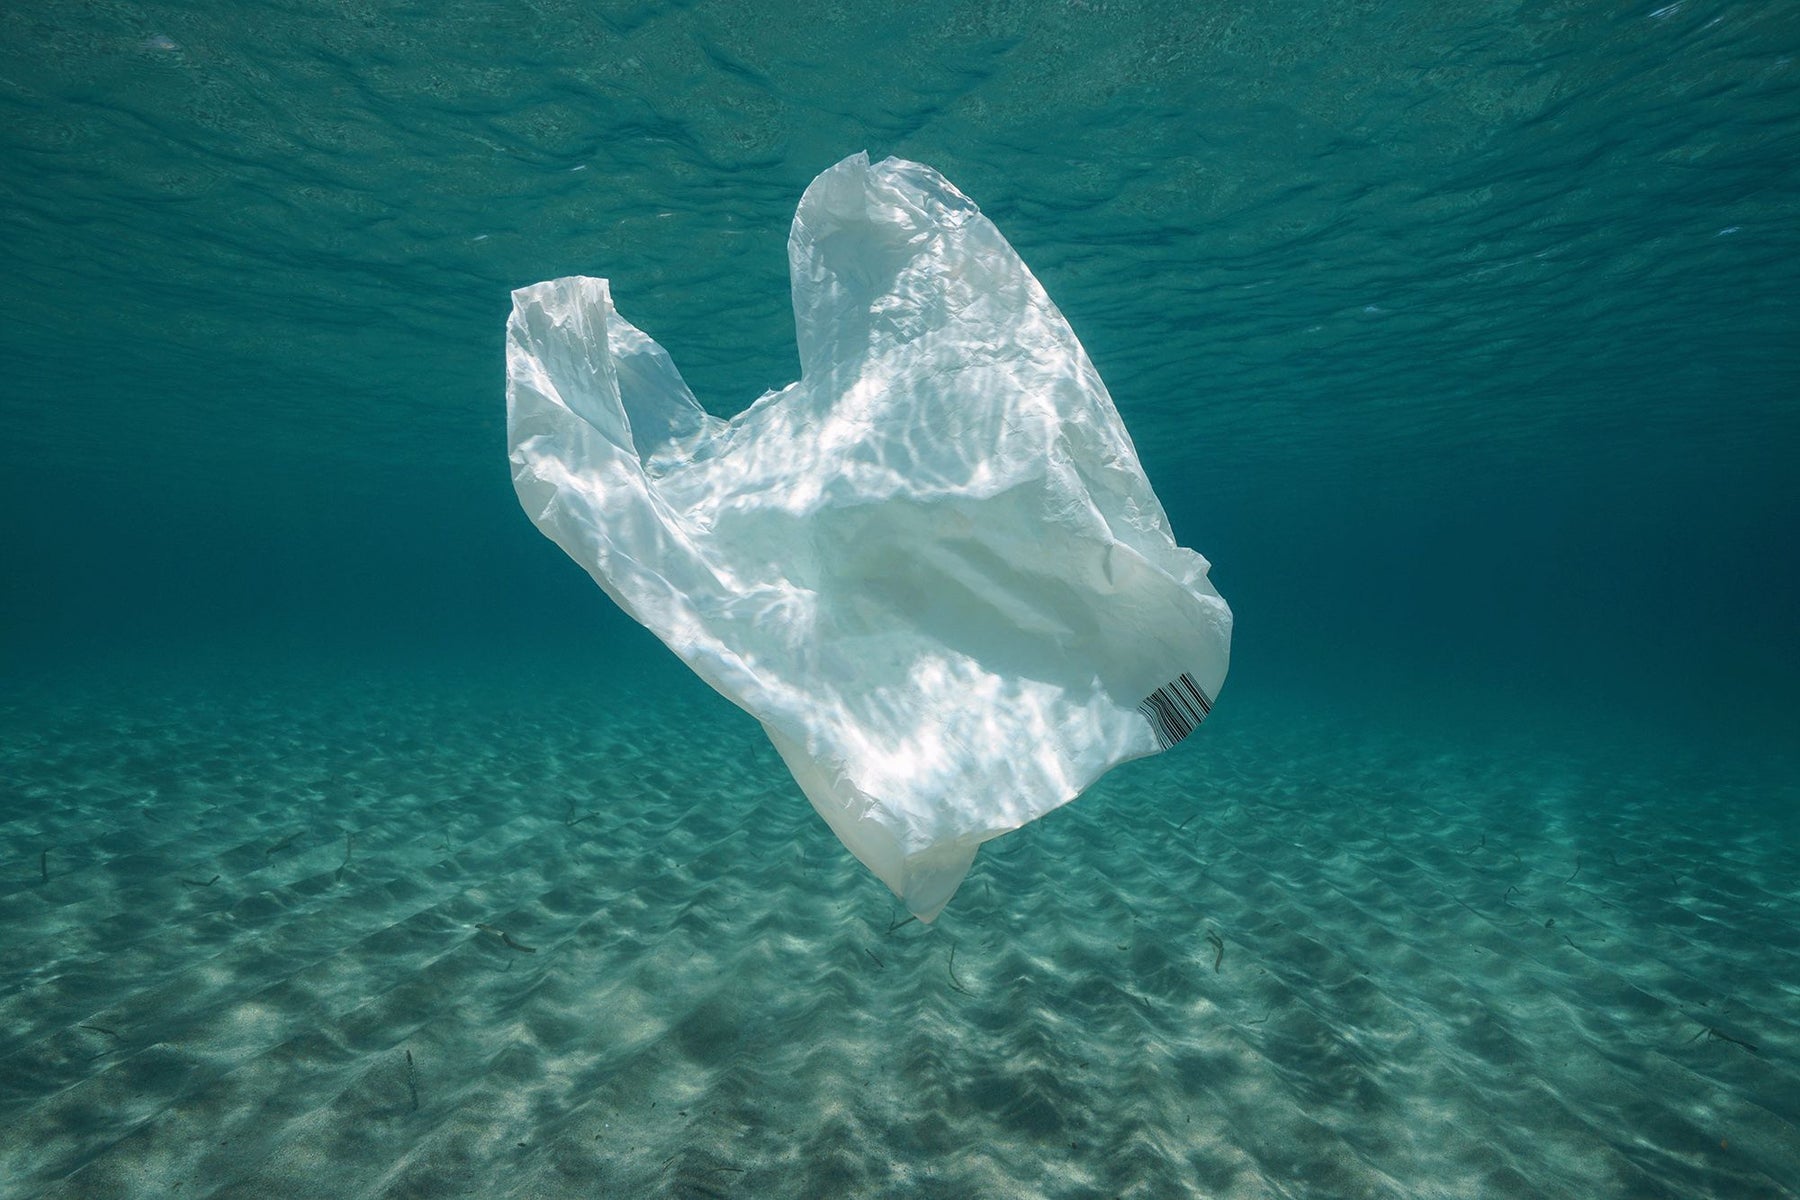 How do biodegradable and degradable bags impact the environment?